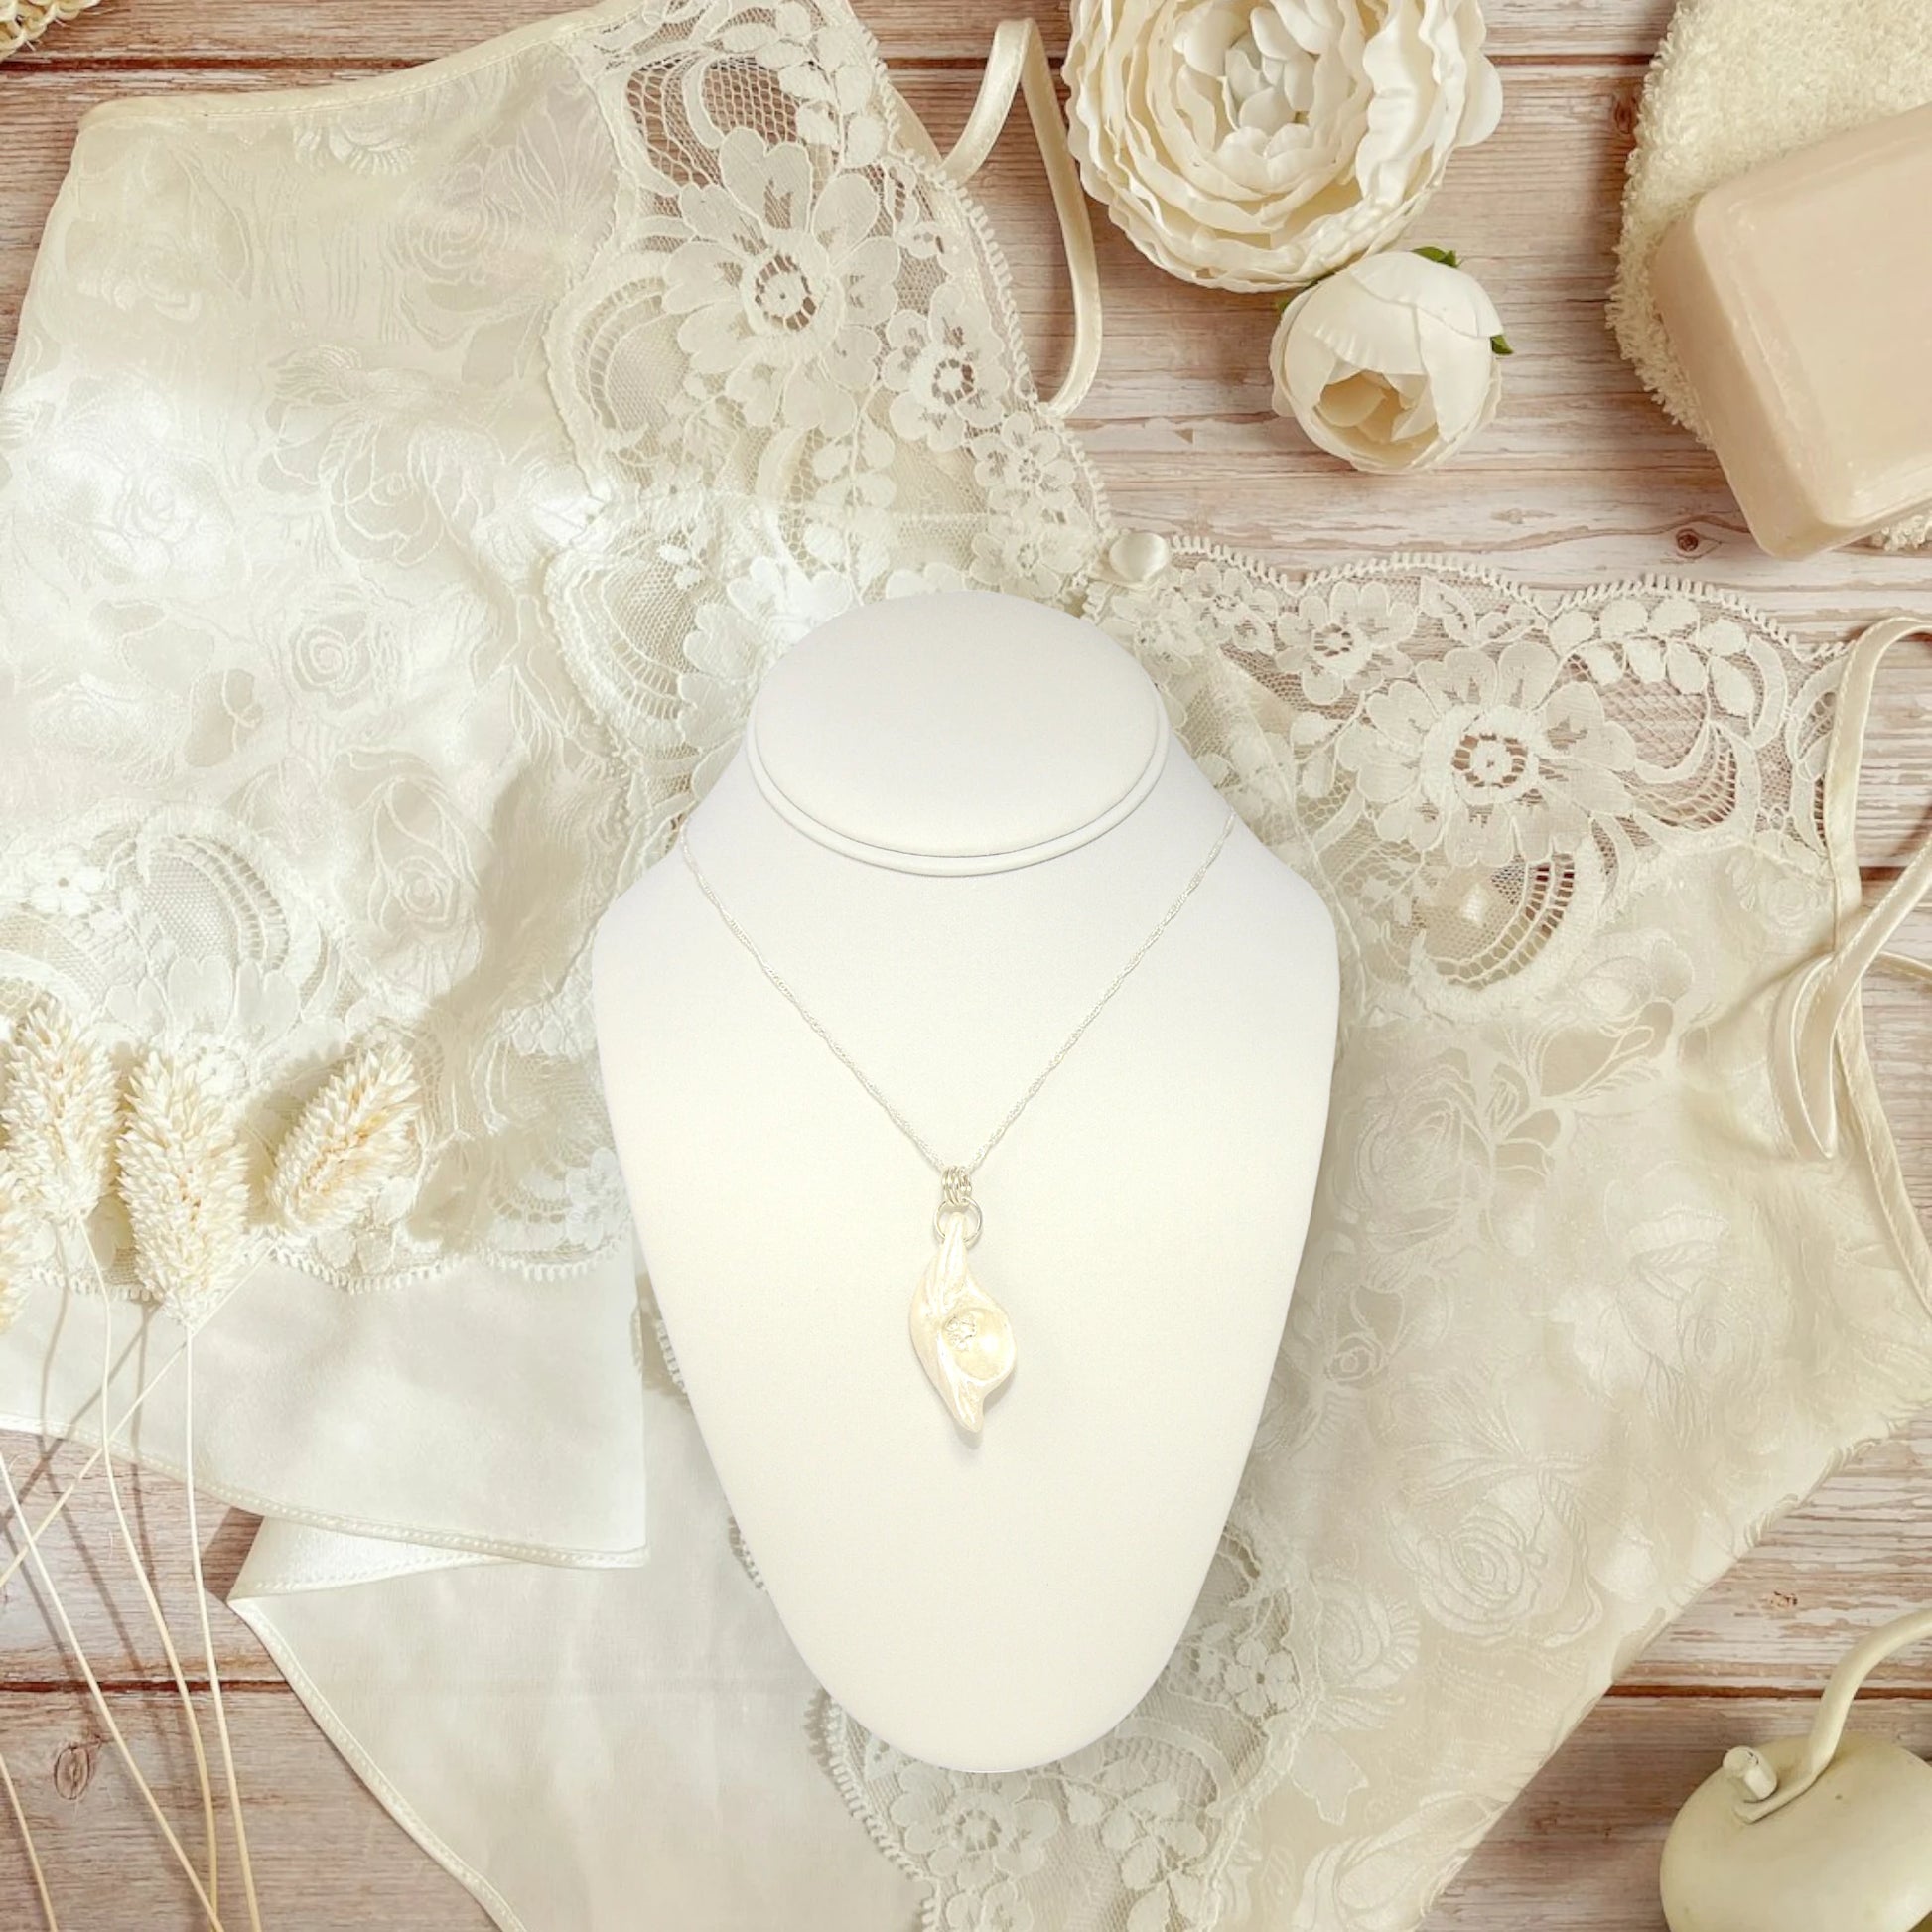 Halo natural seashell pendant with three herkimer diamonds. The pendant is shown hanging on a necklace displayer with a lace camisole and flowers in the background. 